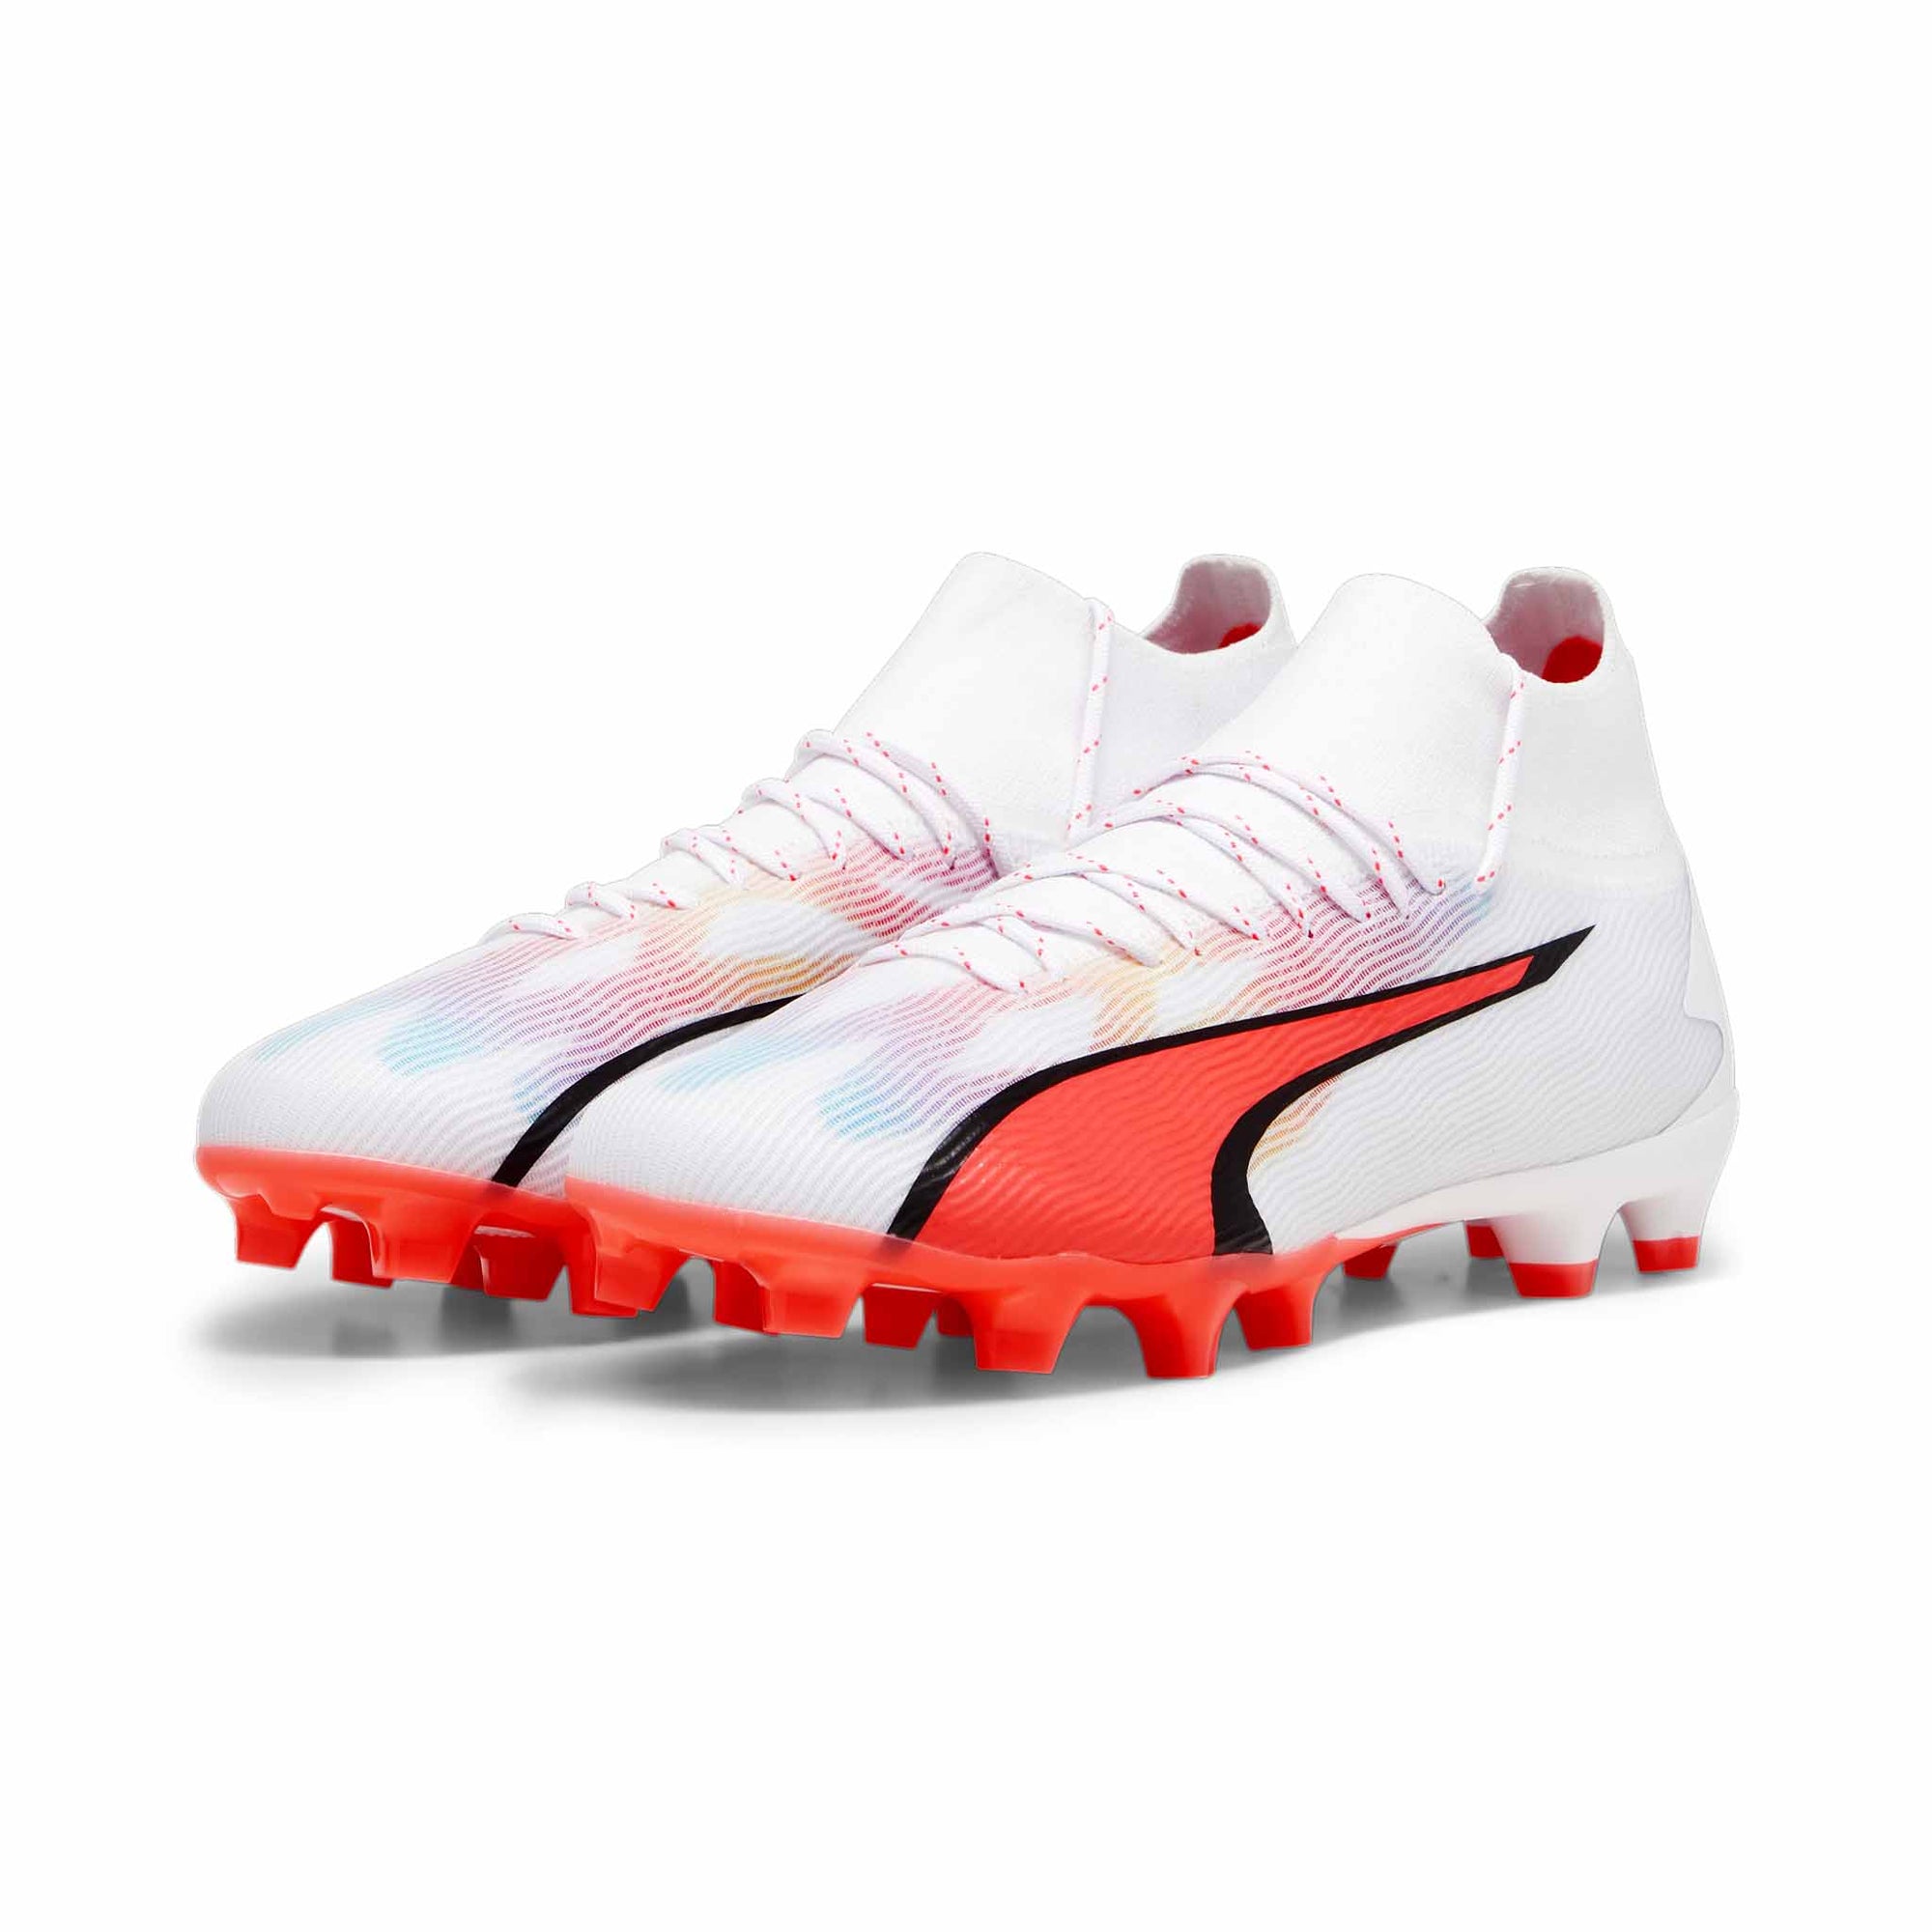 Puma Ultra Pro FG/AG chaussures de soccer a crampons adultes - White / Fire Orchid / Black